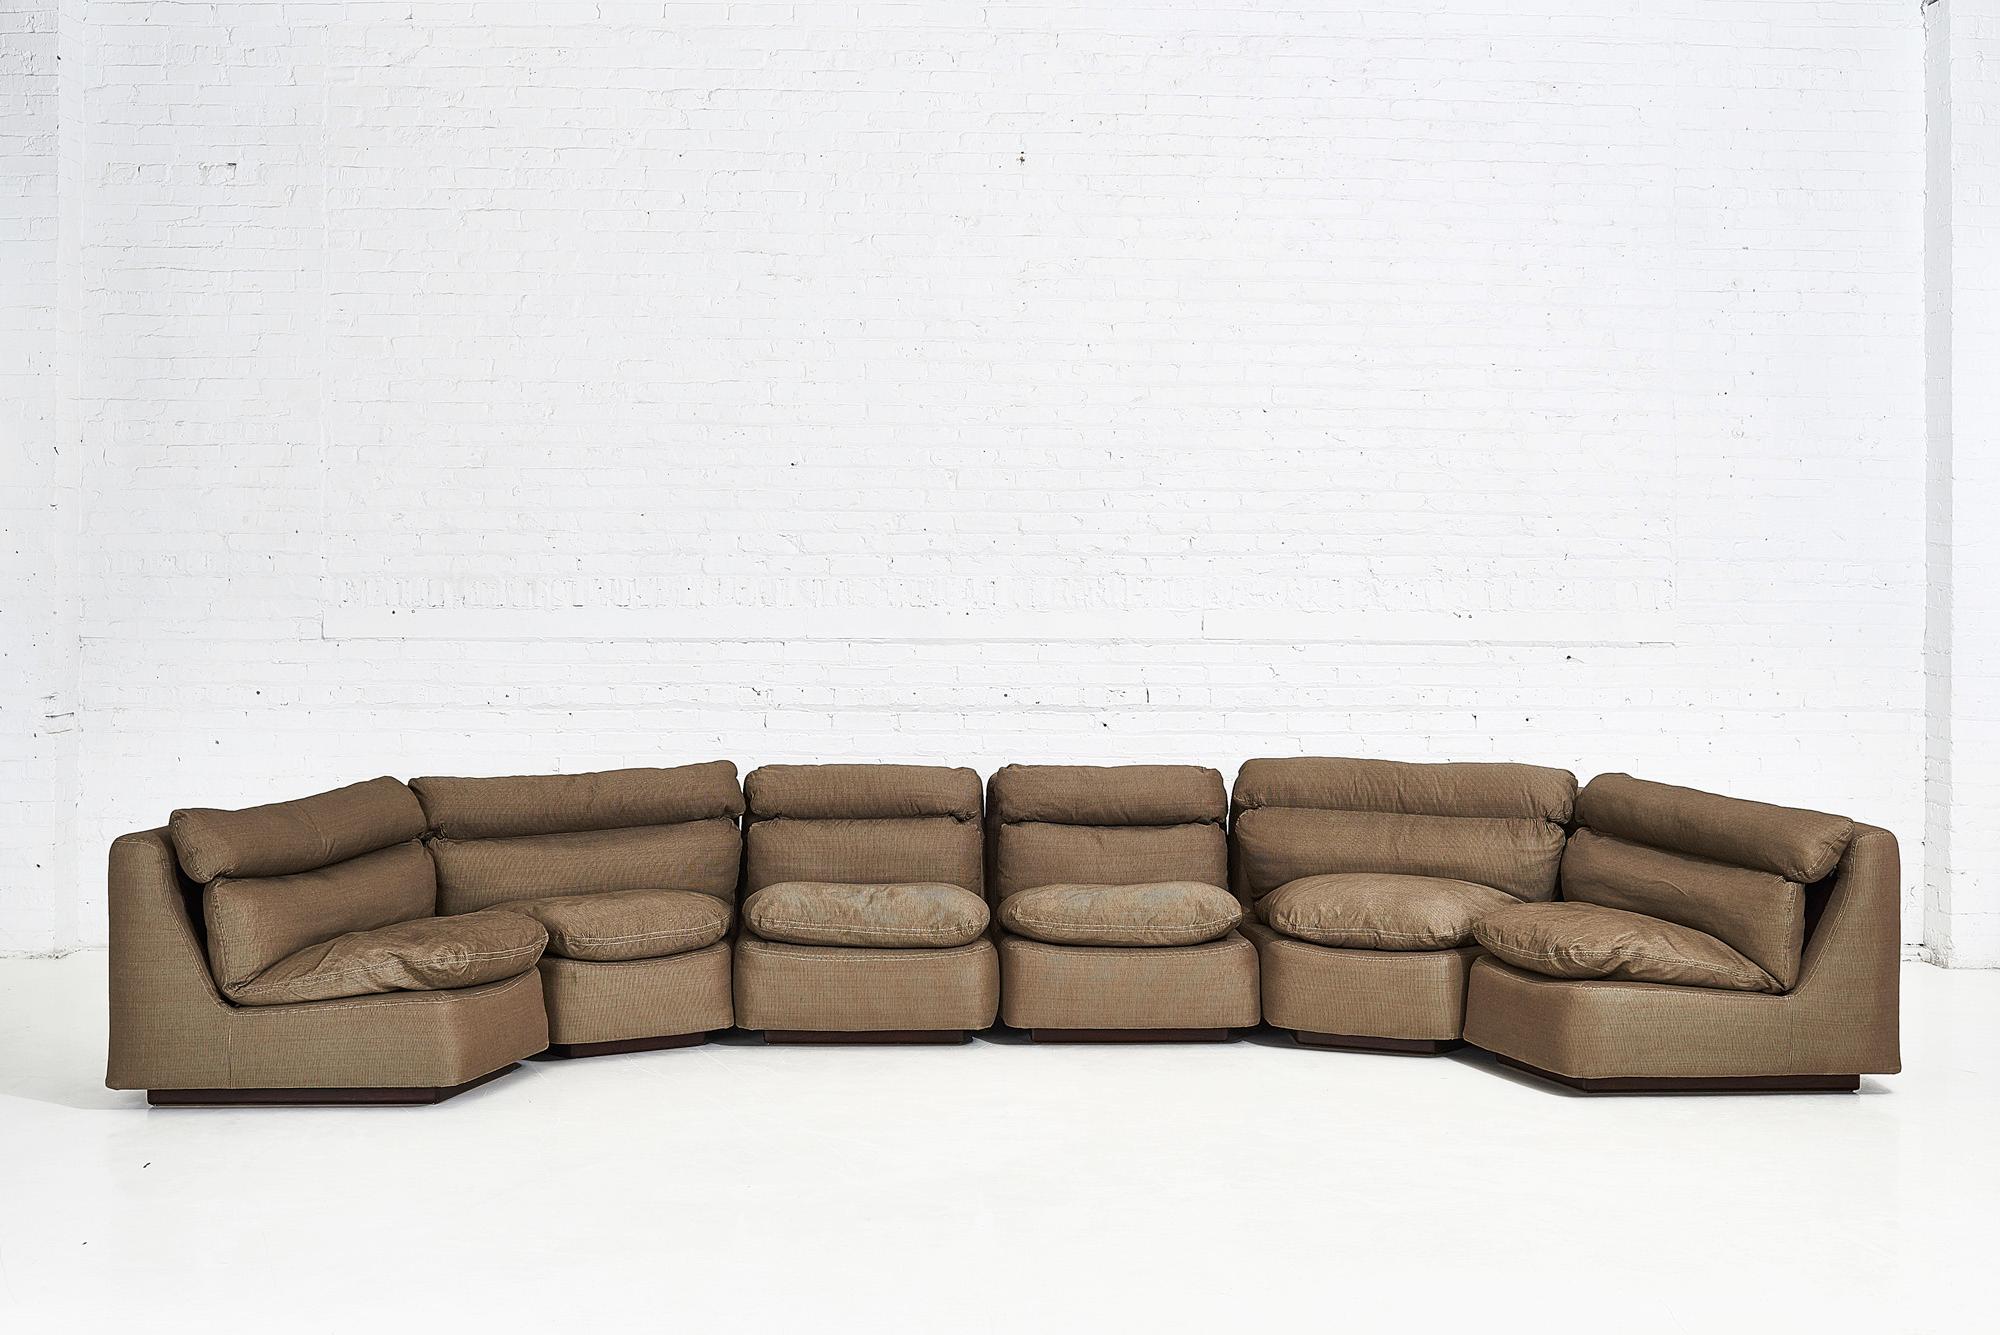 Holly Hunt curved modular 6 piece sectional, 1990. Original upholstery.